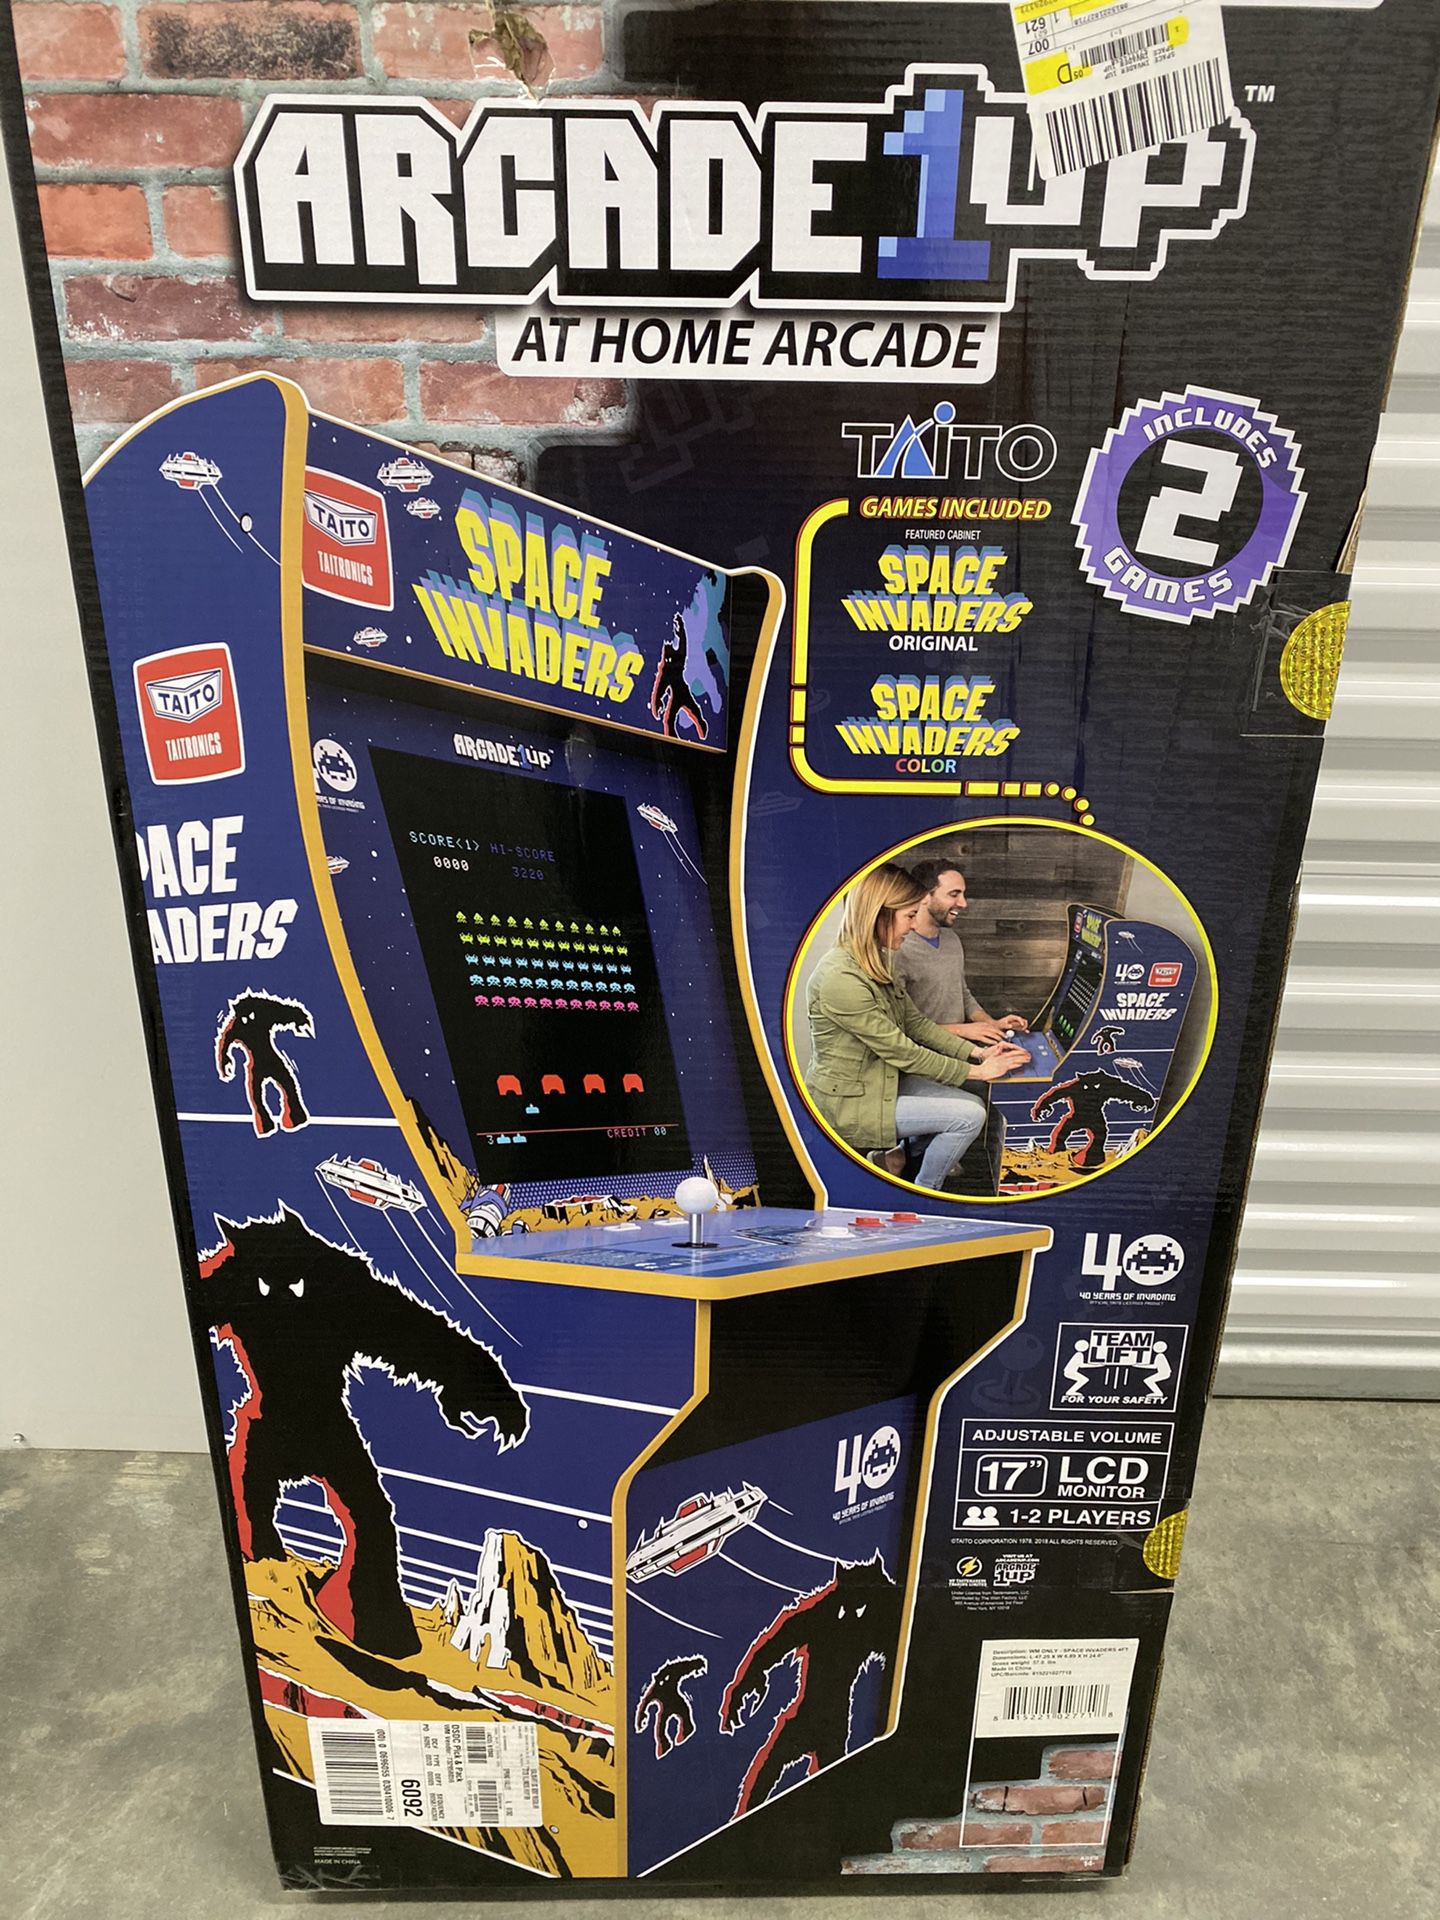 ARCADE 1UP SPACE INVADERS Video Game, Retro Video games, OLD Arcade games, Old School video games , Space Invaders